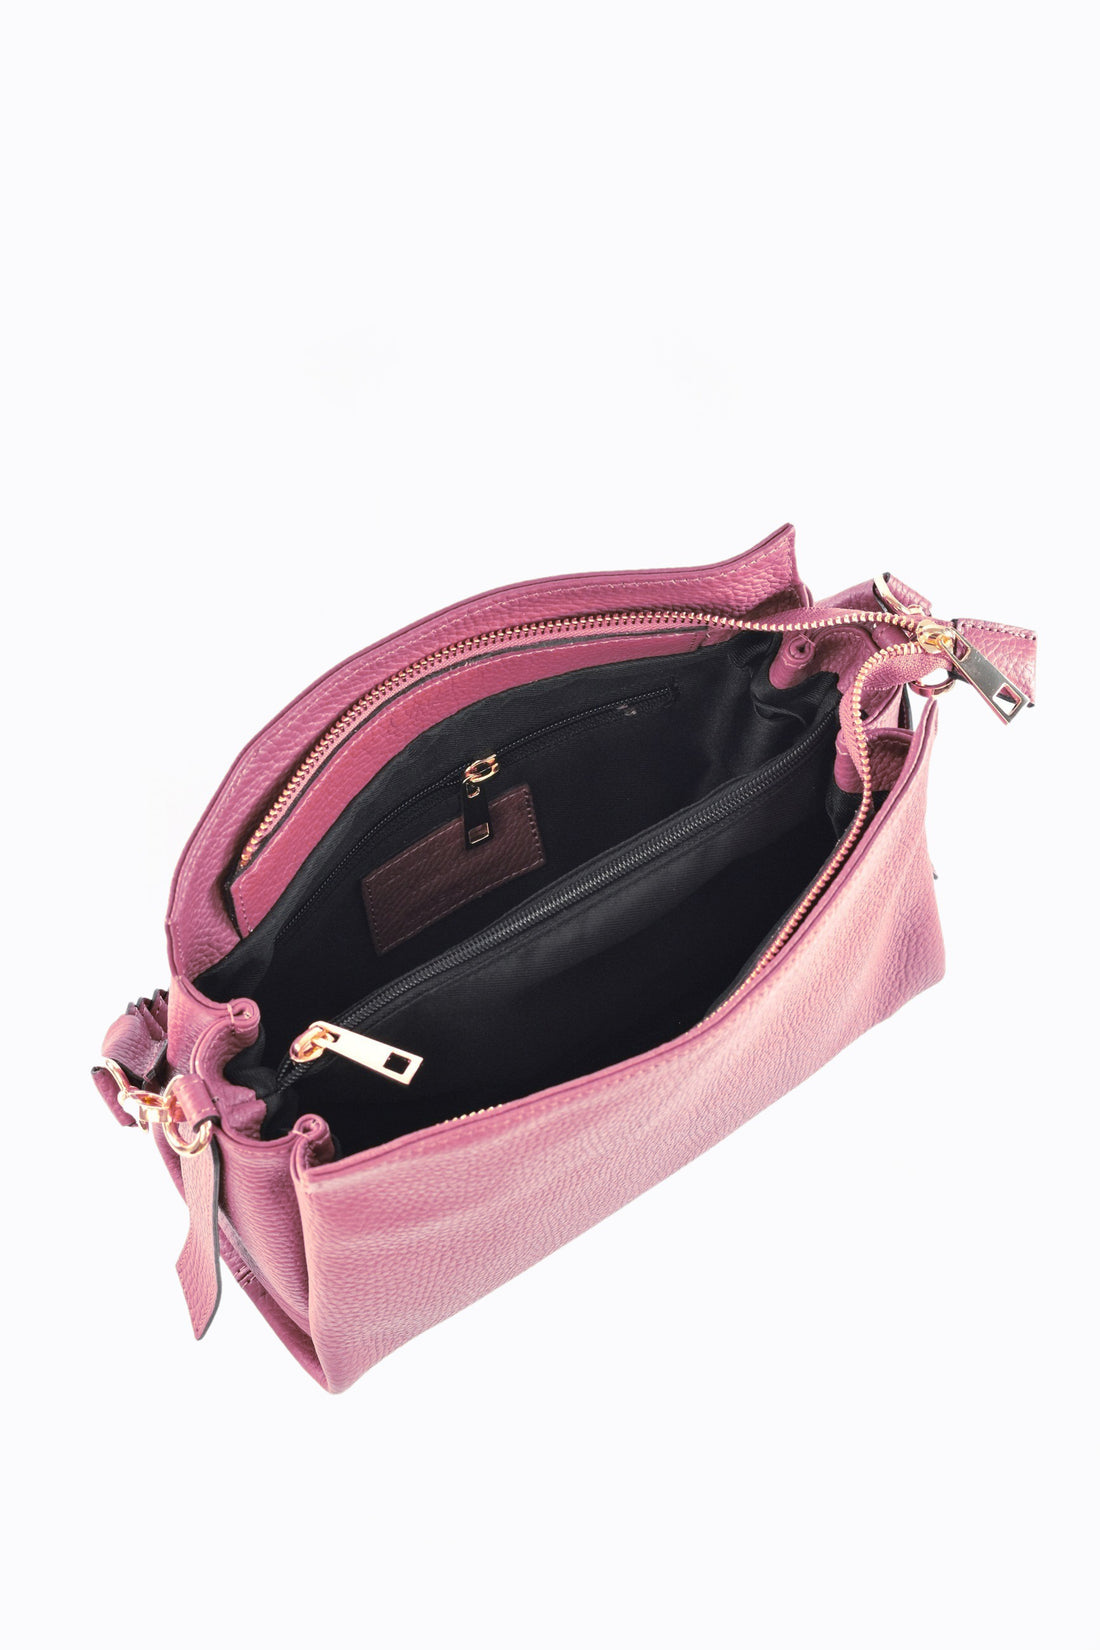 Braid Micro bag in Antique Pink Dollar leather